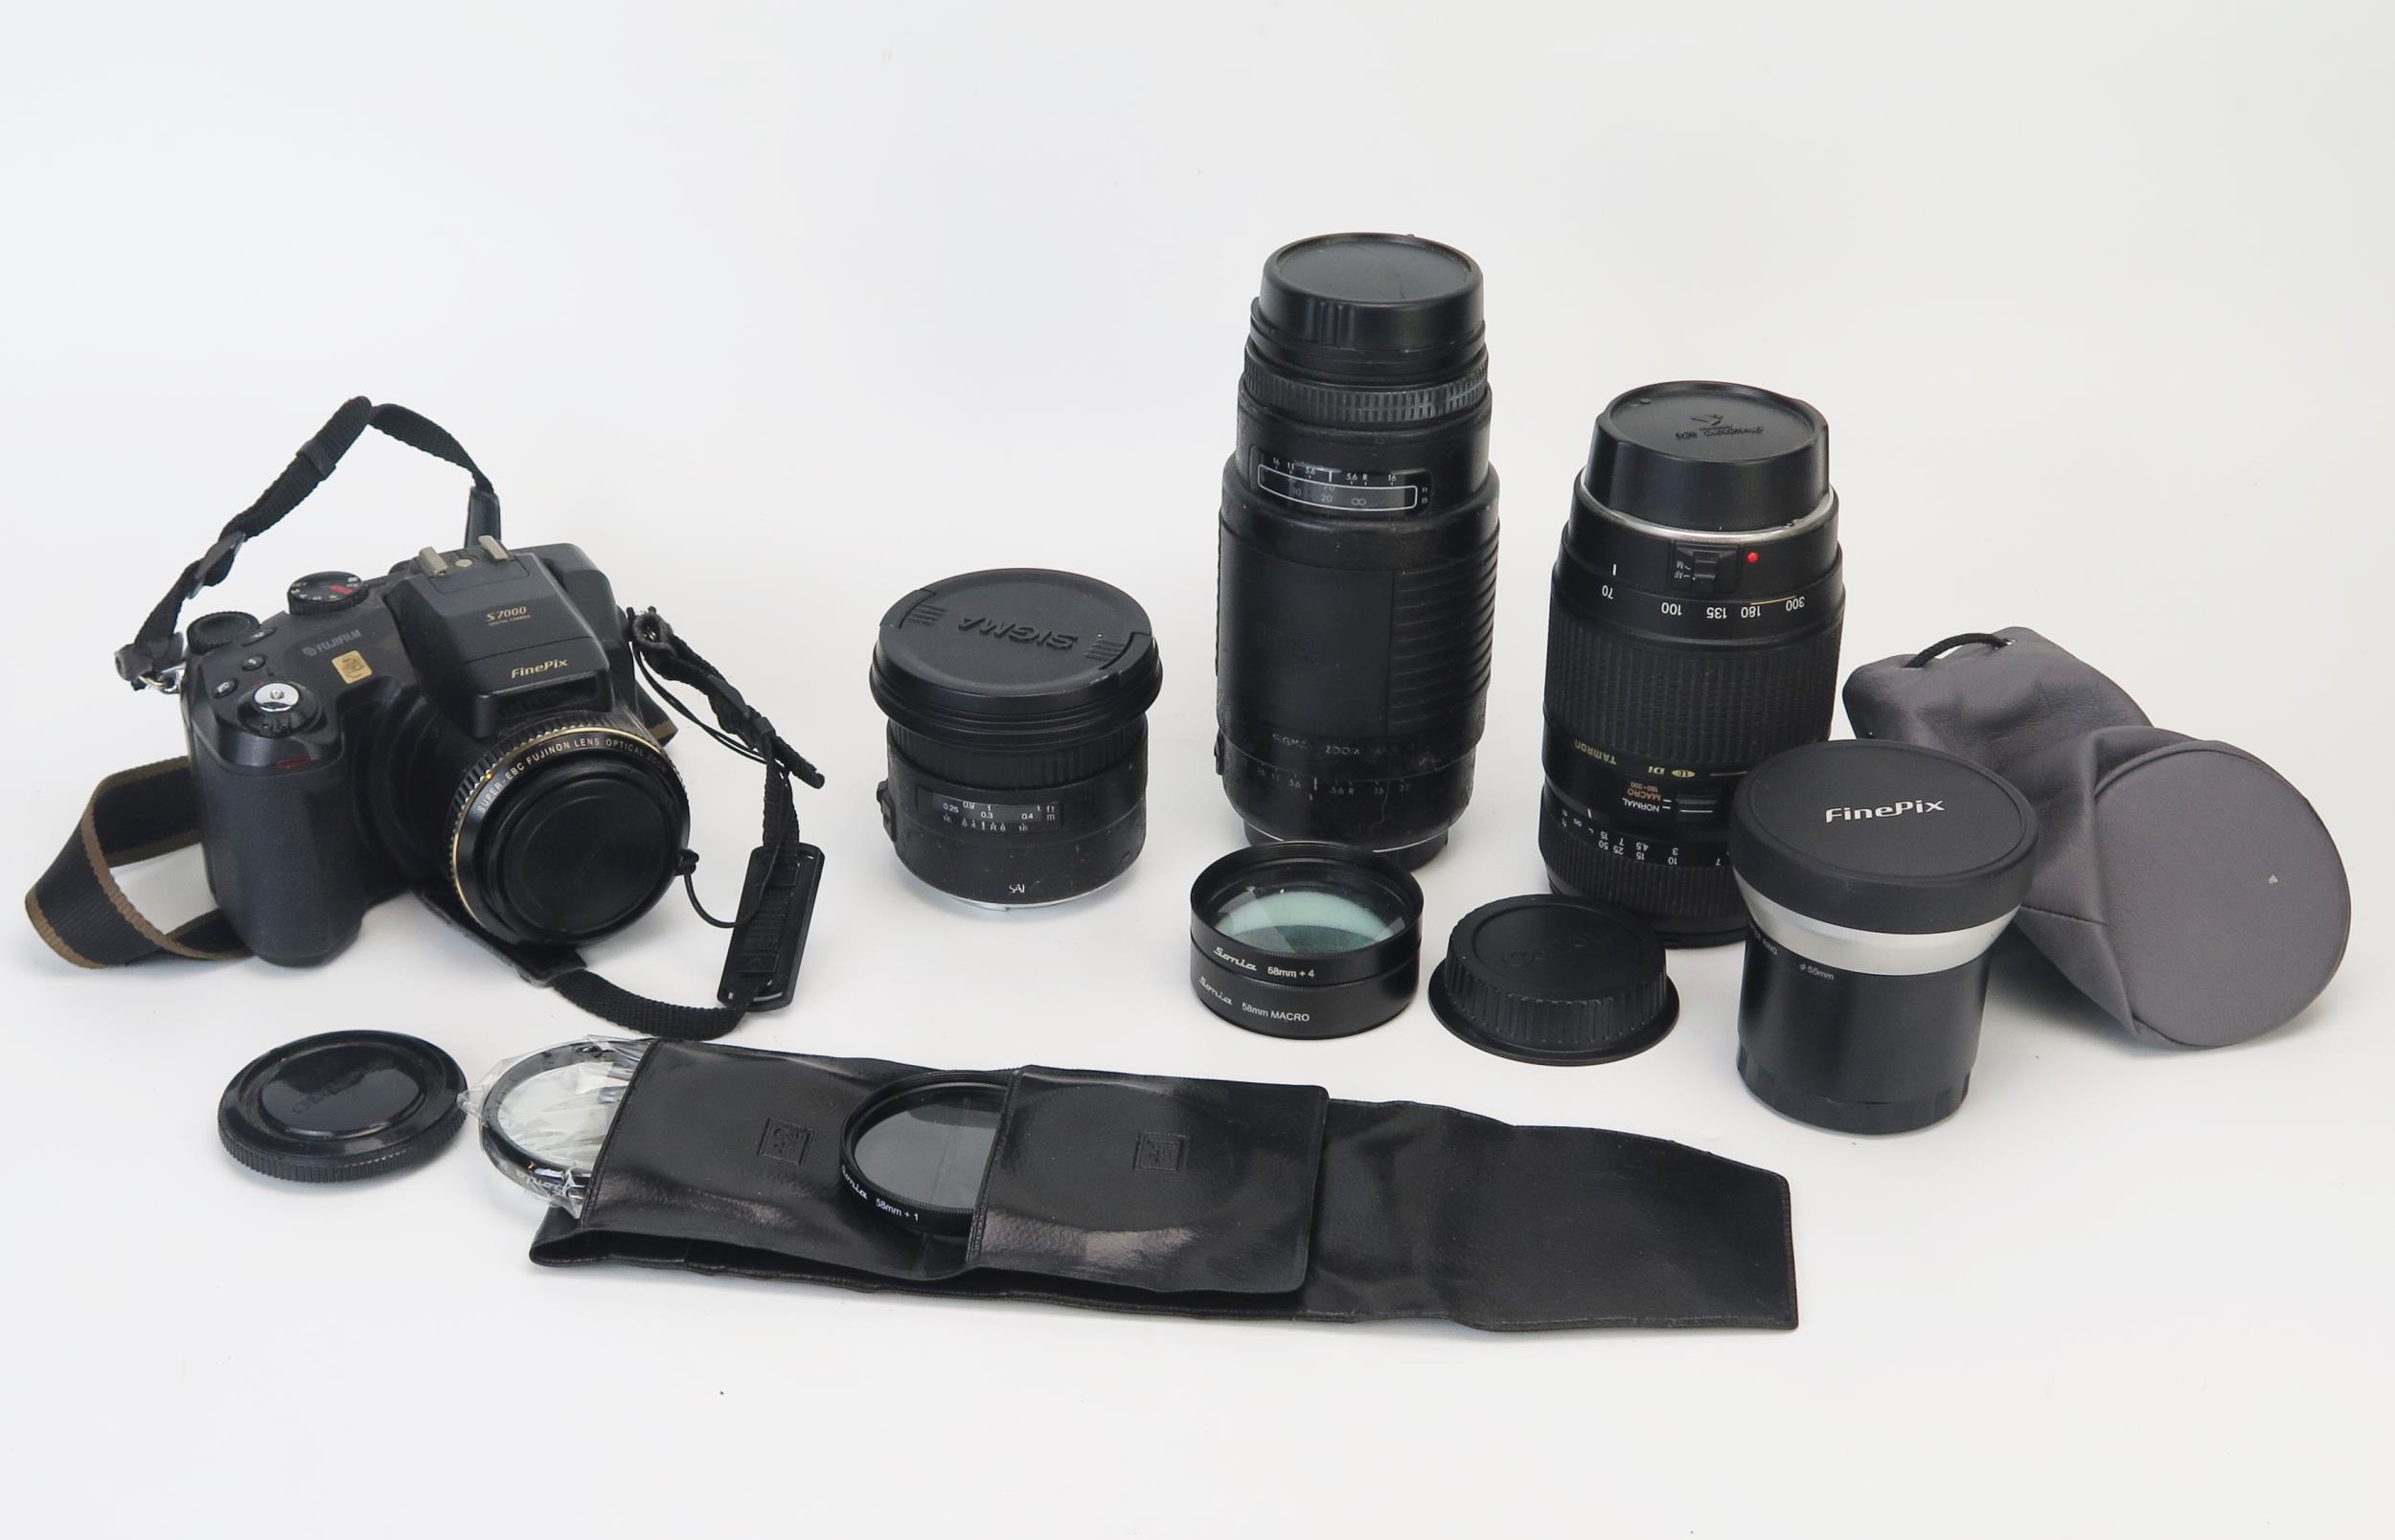 Collection of Camera Lenses including Sigma Auto Focus APO 75-300mm, Tamron AF 70-300mm, Sigma 18mm,